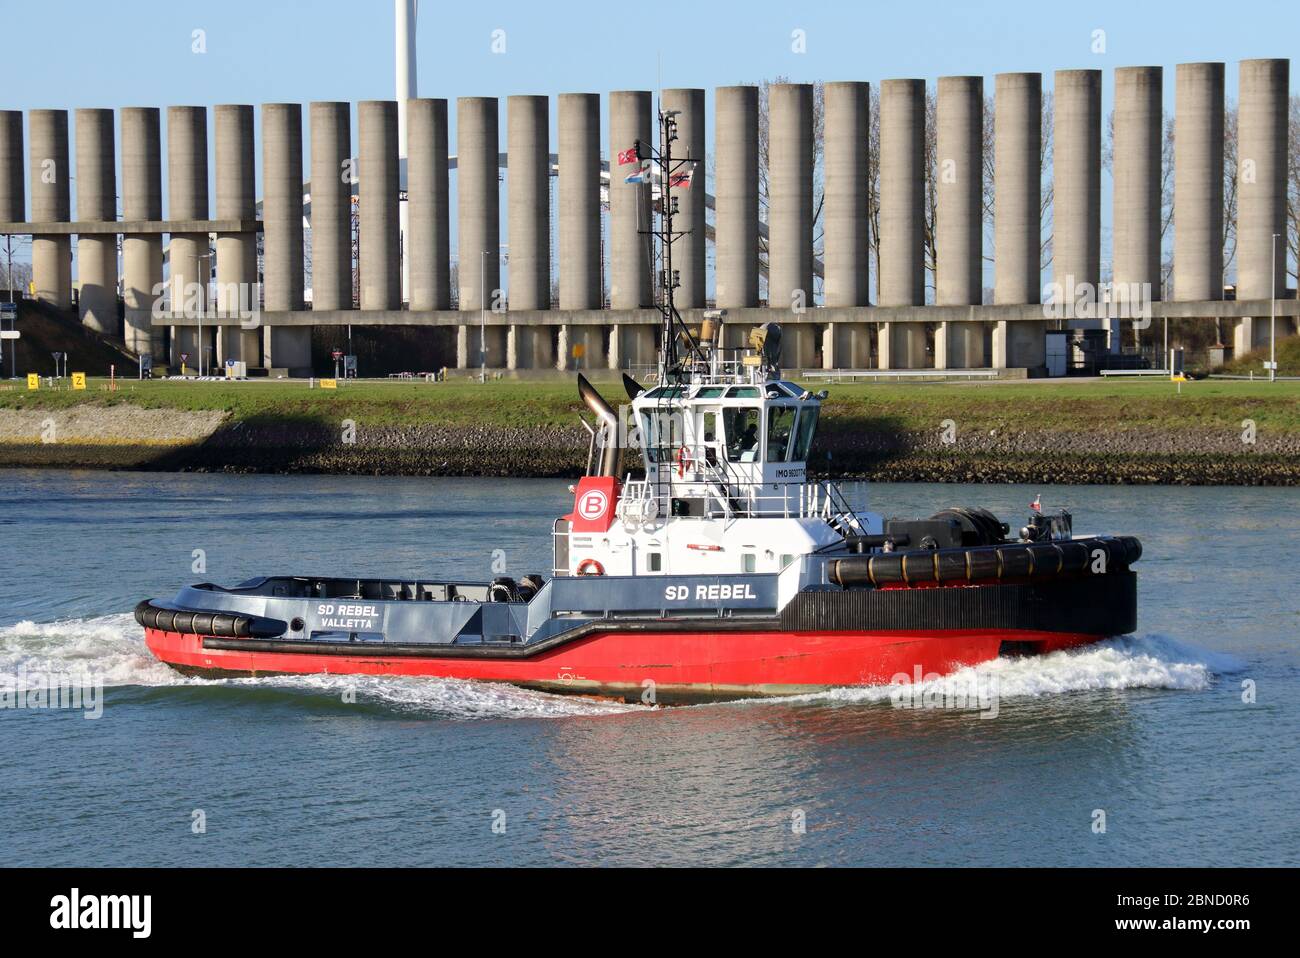 The SD Rebel harbor tug works in the port of Rotterdam on March 12, 2020. Stock Photo